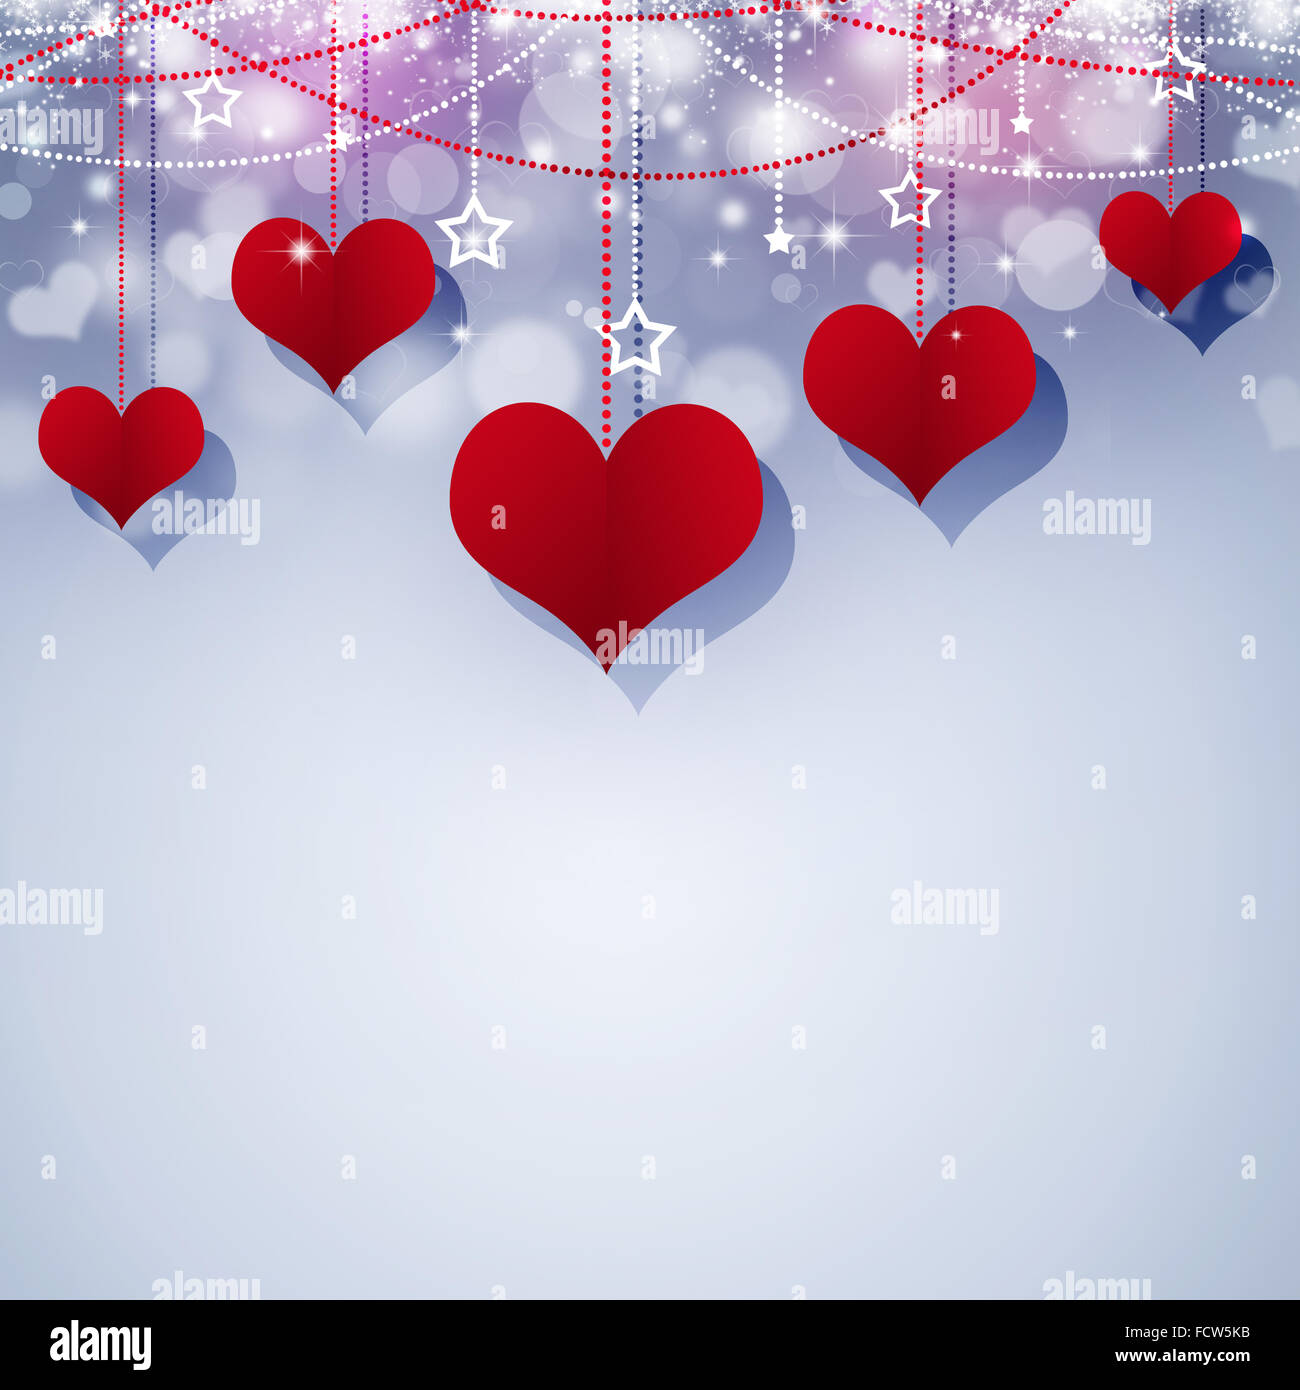 holiday valentine gift card with red hearts decor Stock Photo